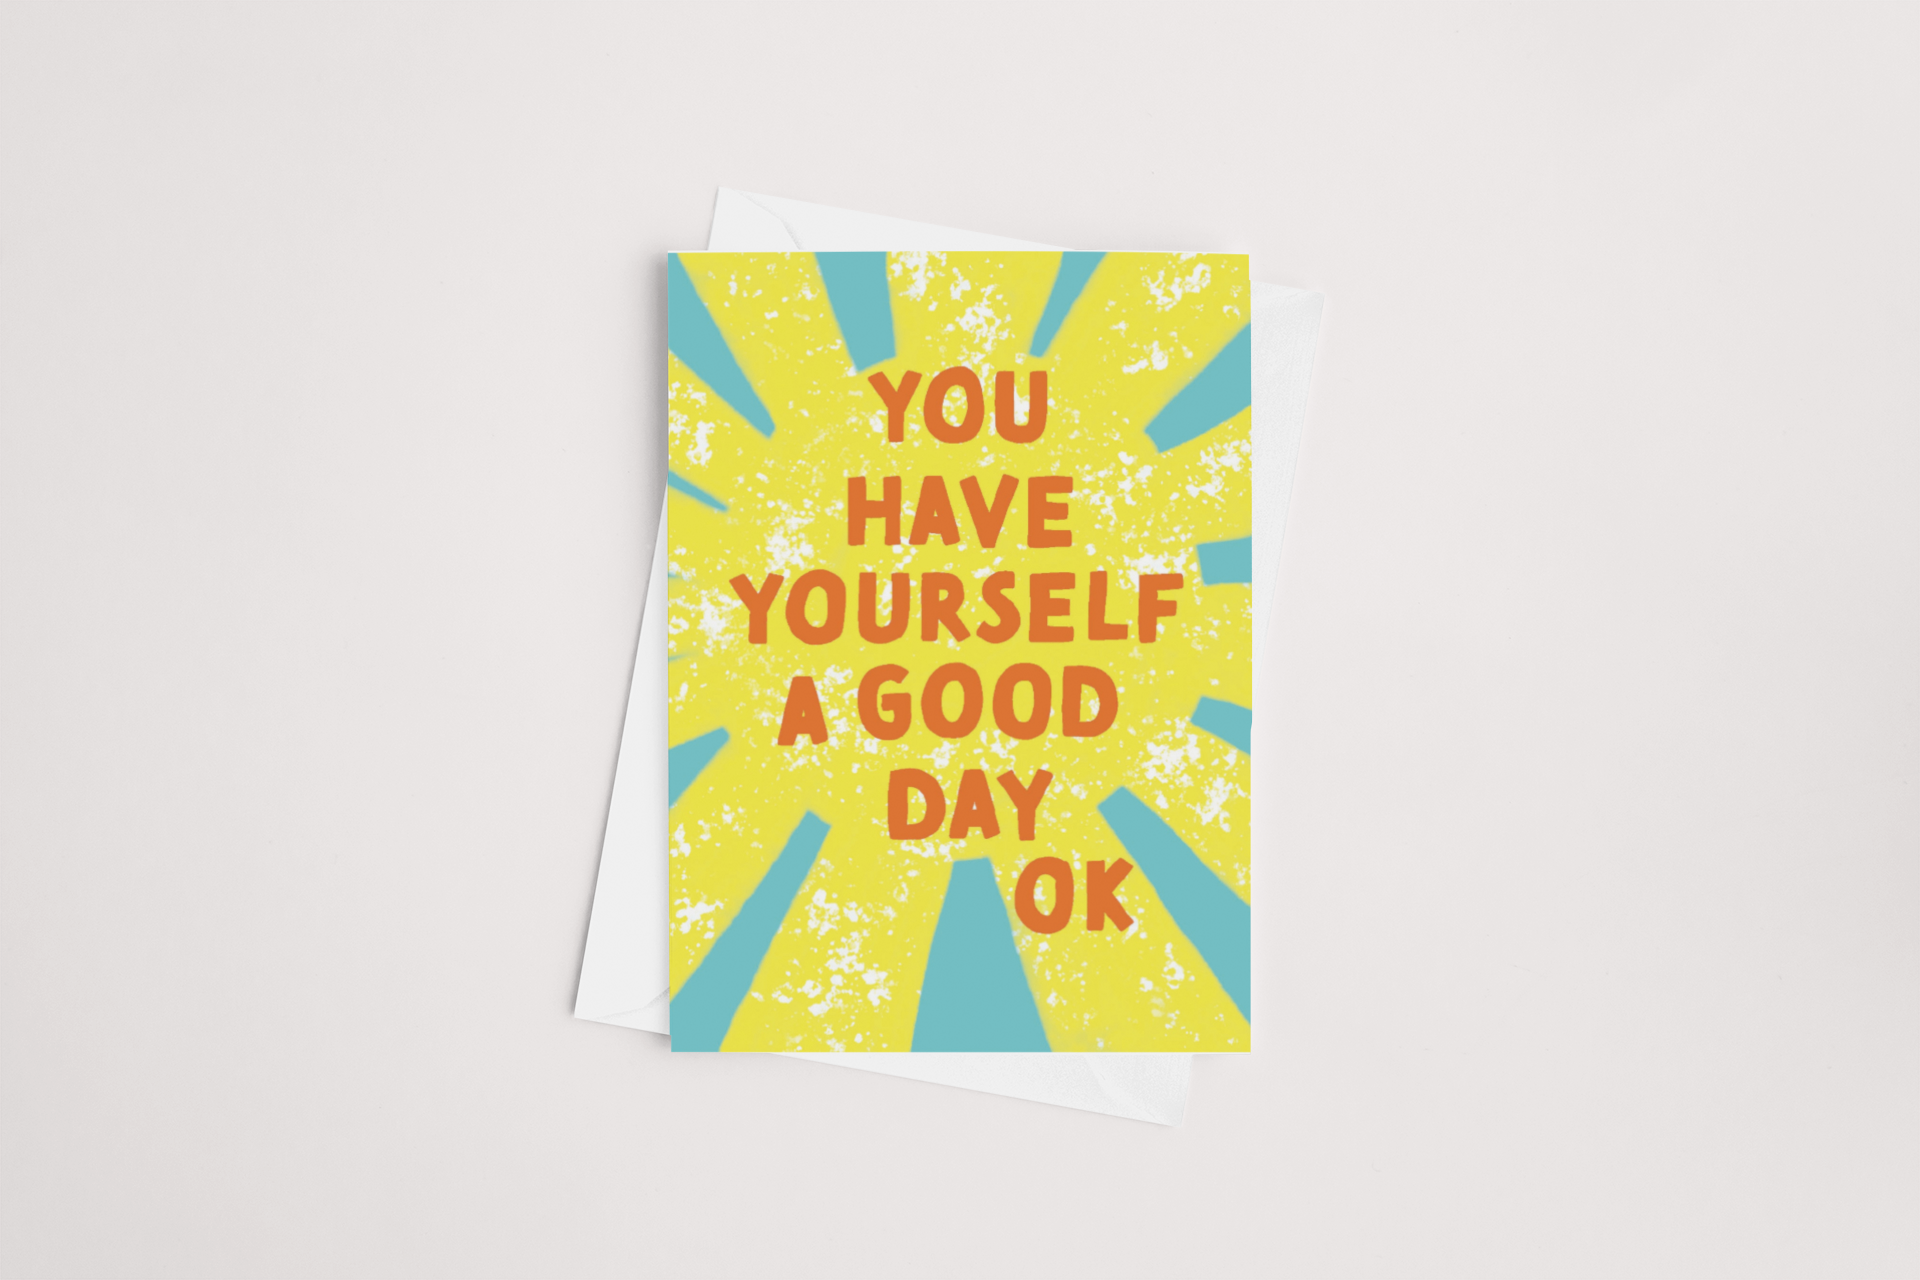 Vibrant Good Day Card, a product of Tuesday Print from New Zealand, with an encouraging message, "you have yourself a good day ok," set against a dynamic yellow and blue starburst pattern.